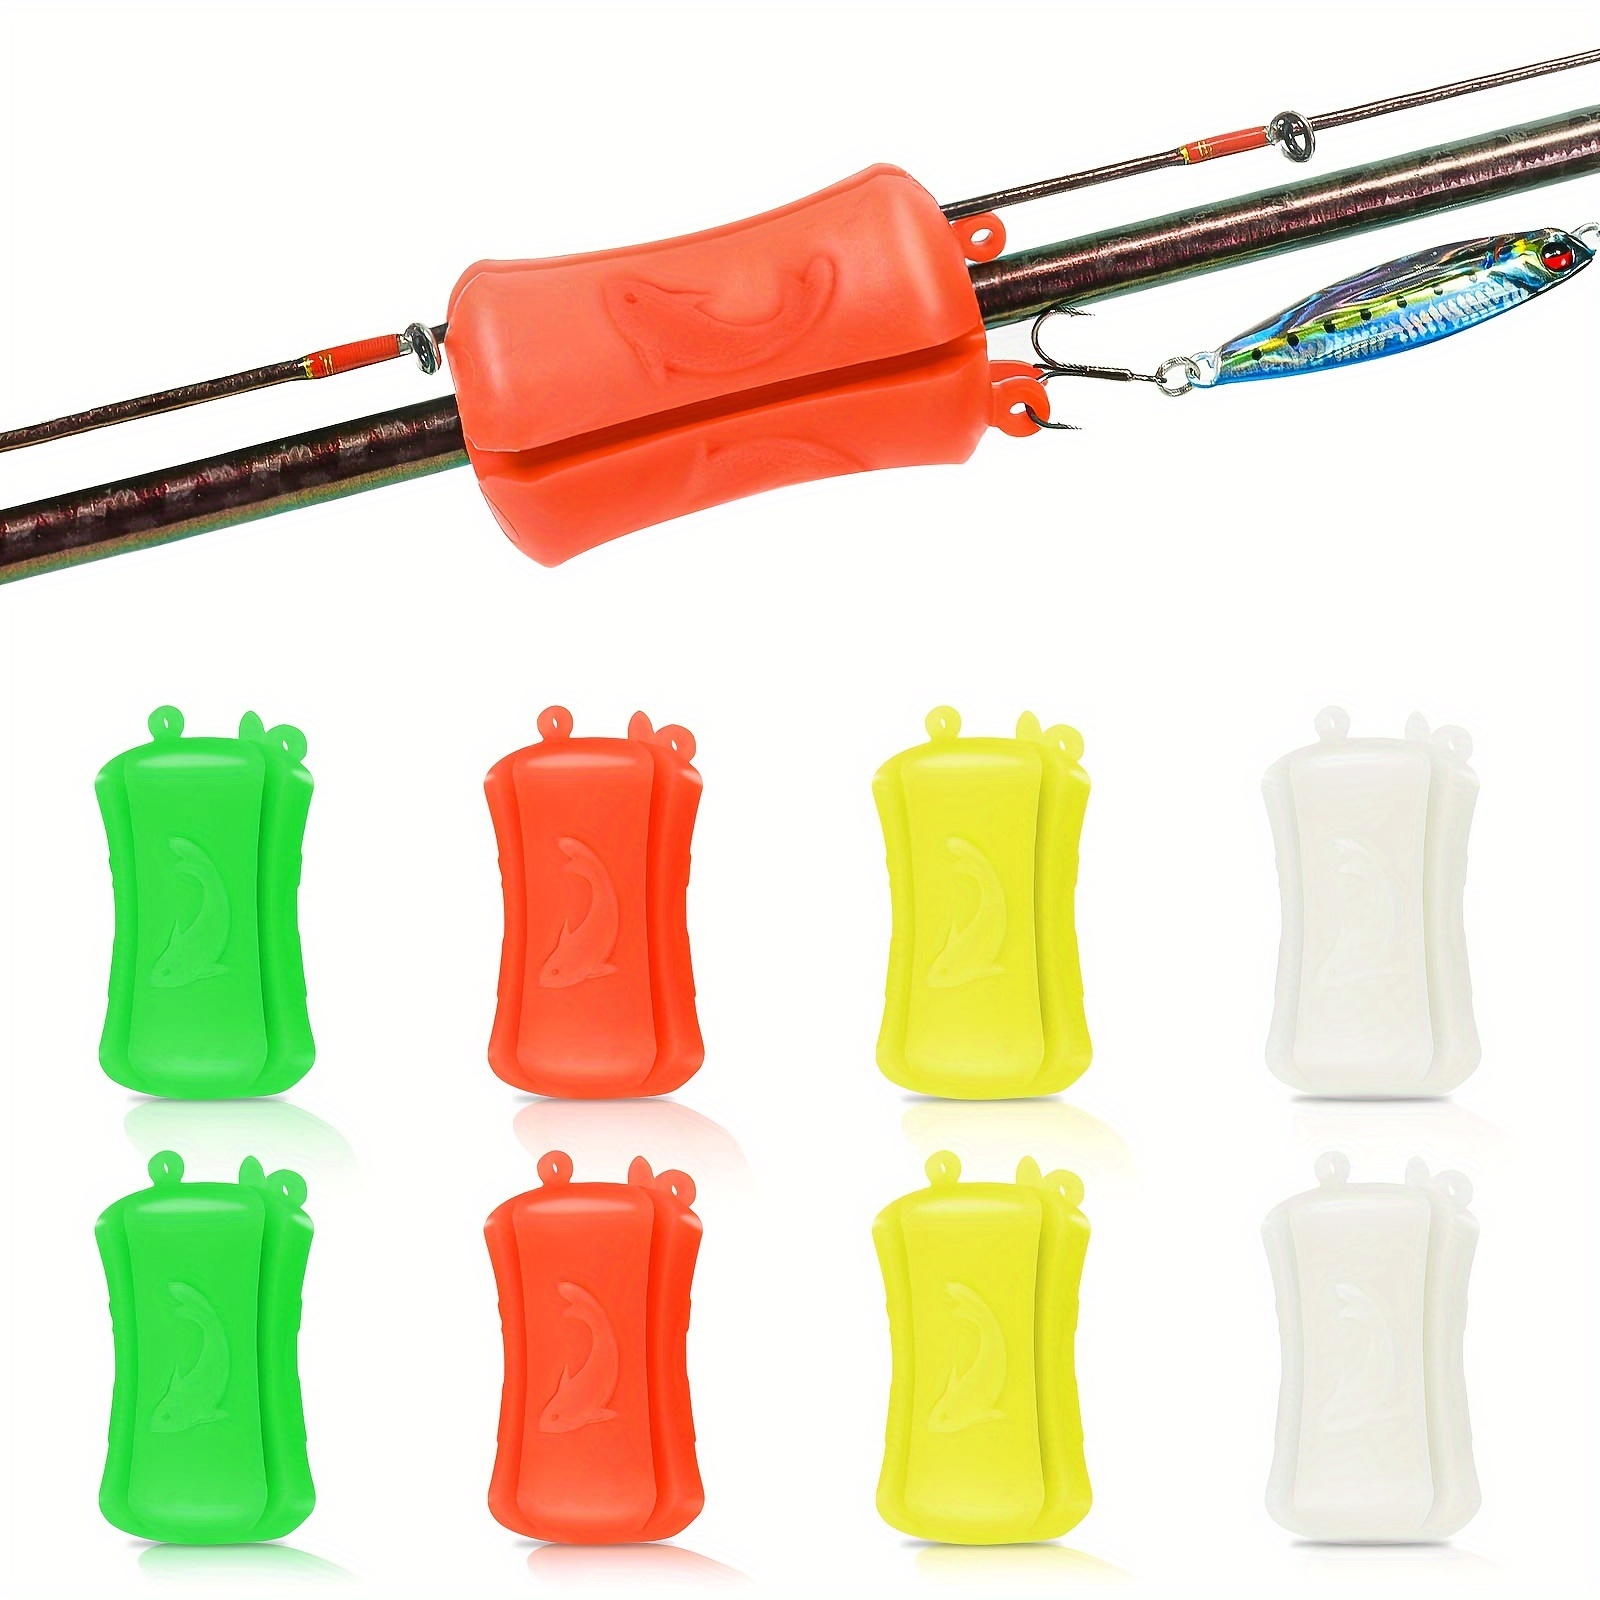 8pcs Portable Fishing Rod Fixed Ball, Silicone Fishing Rod Clip,  Multi-Function Reusable Wear Resistant Holder For Various Sizes Fishing Pole